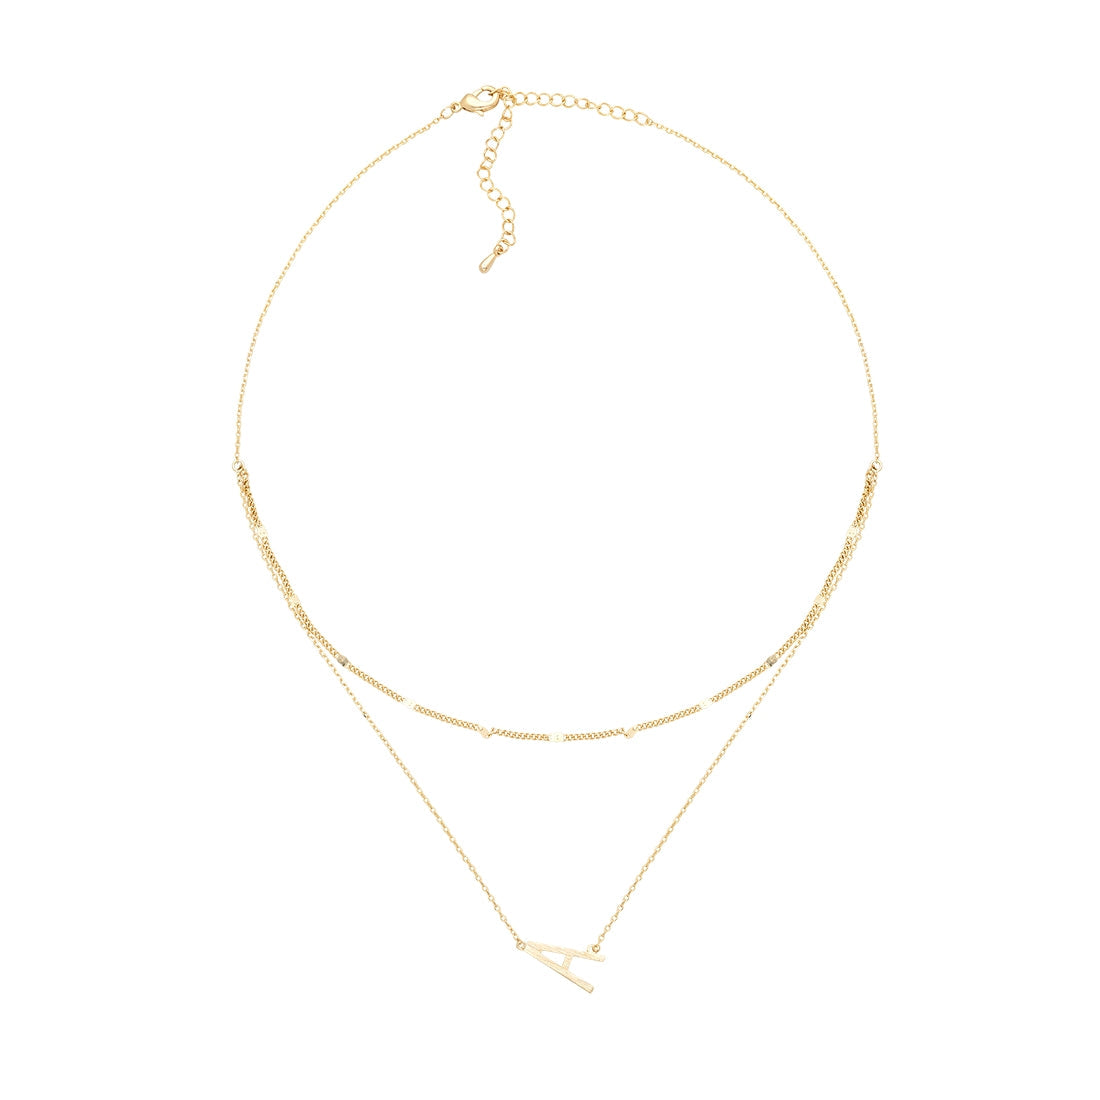 A Gold Double Chain Necklace